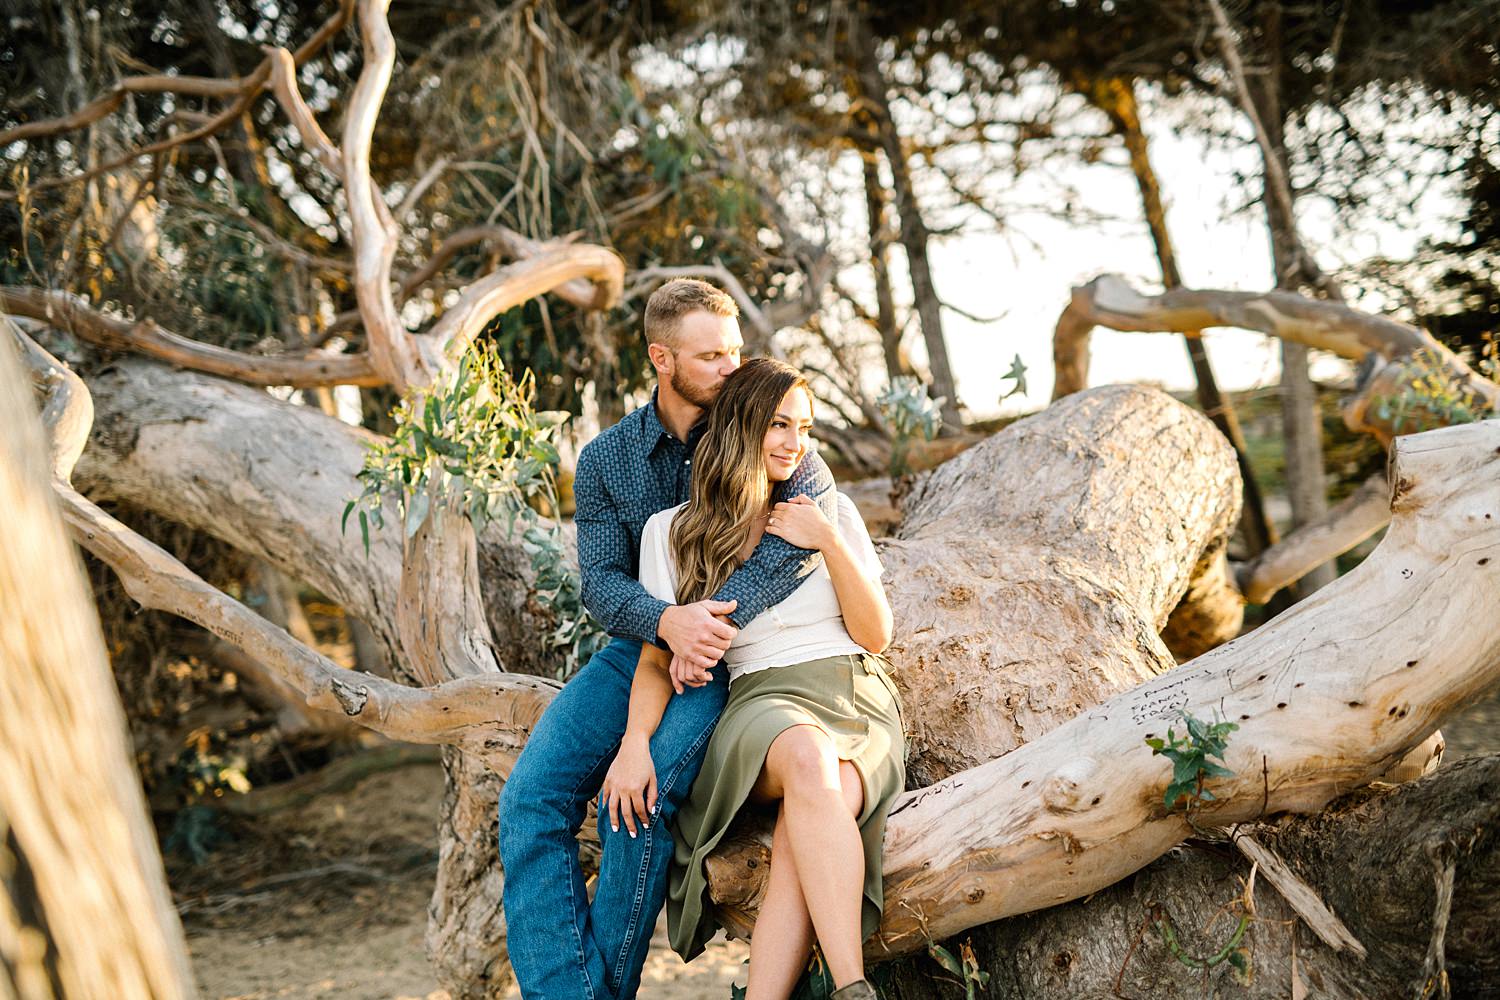 Couple's posing during Engagement Session at Pismo Beach Dunes at Sunset by Pismo Beach Engagement Photographer Austyn Elizabeth Photography 